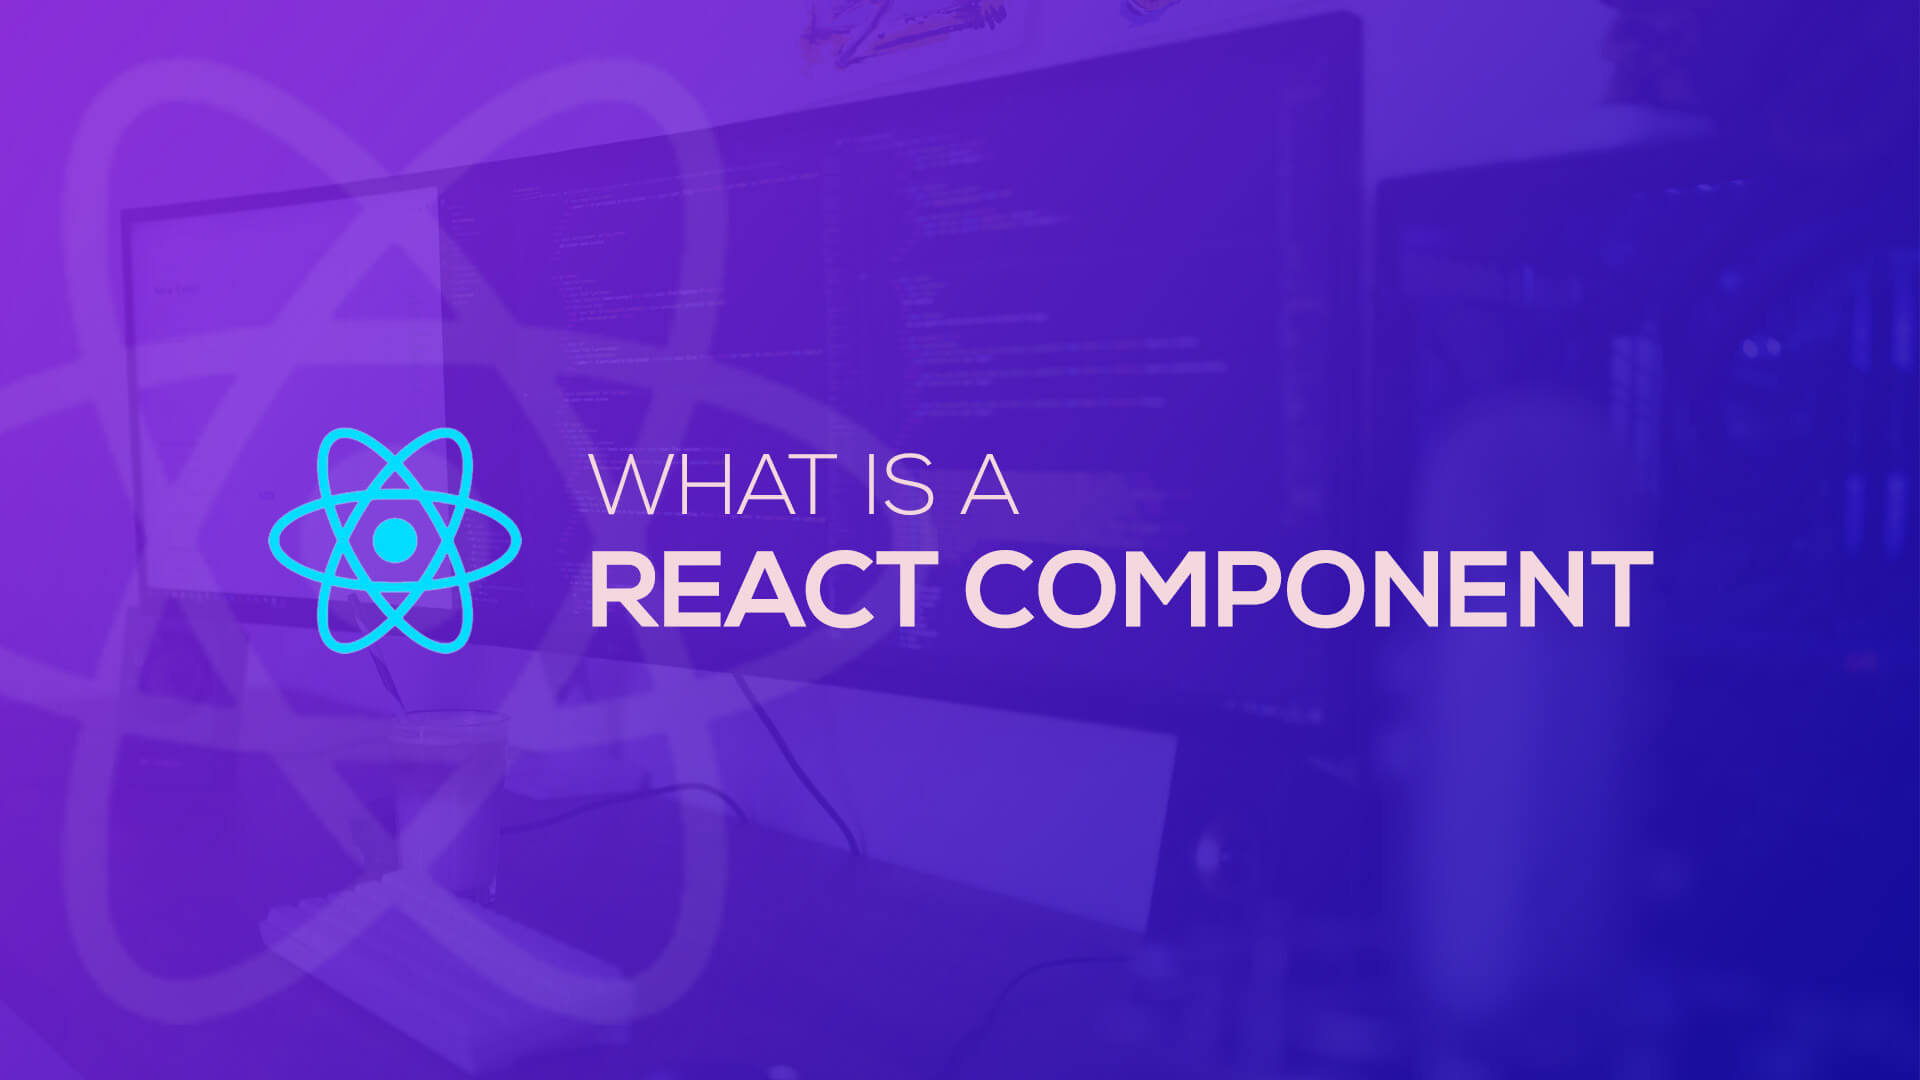 What is a React Component?